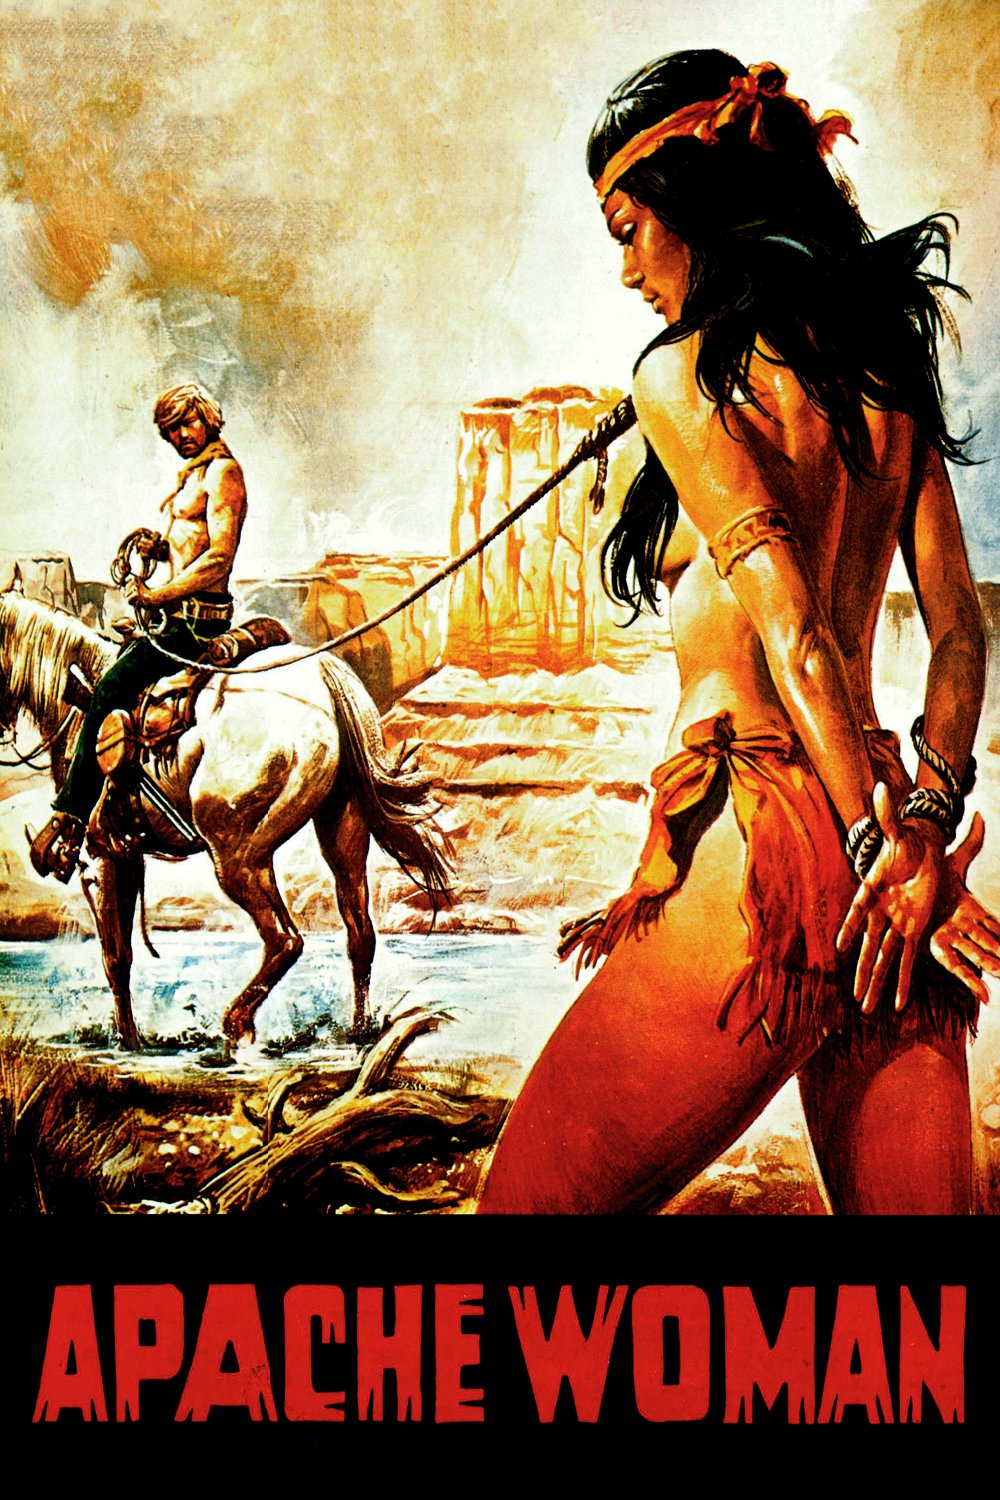 Apache Woman Movie Poster 13x19 inches